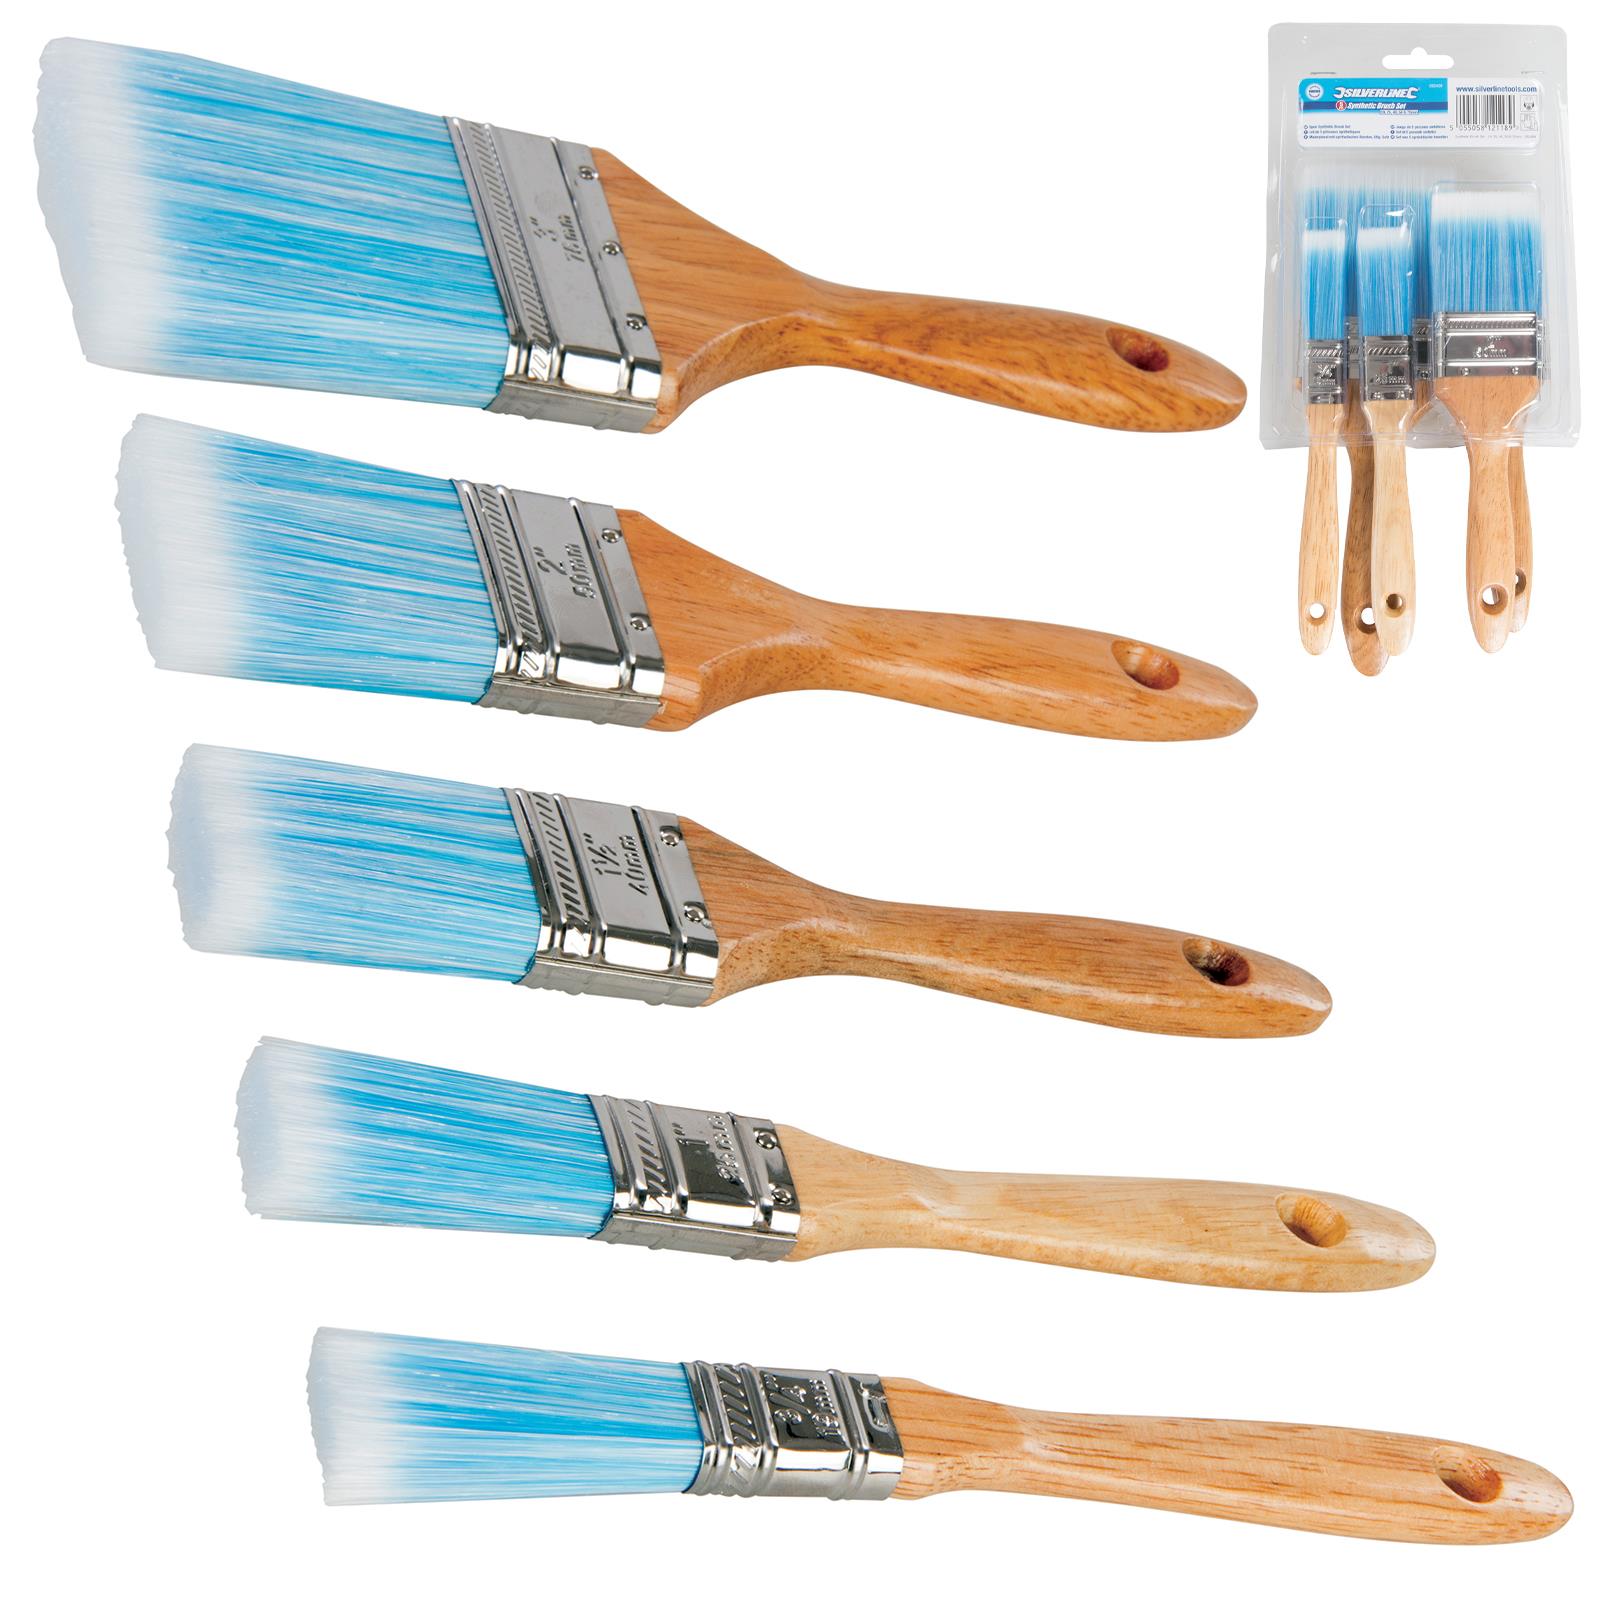 2 inch Paint Brushes